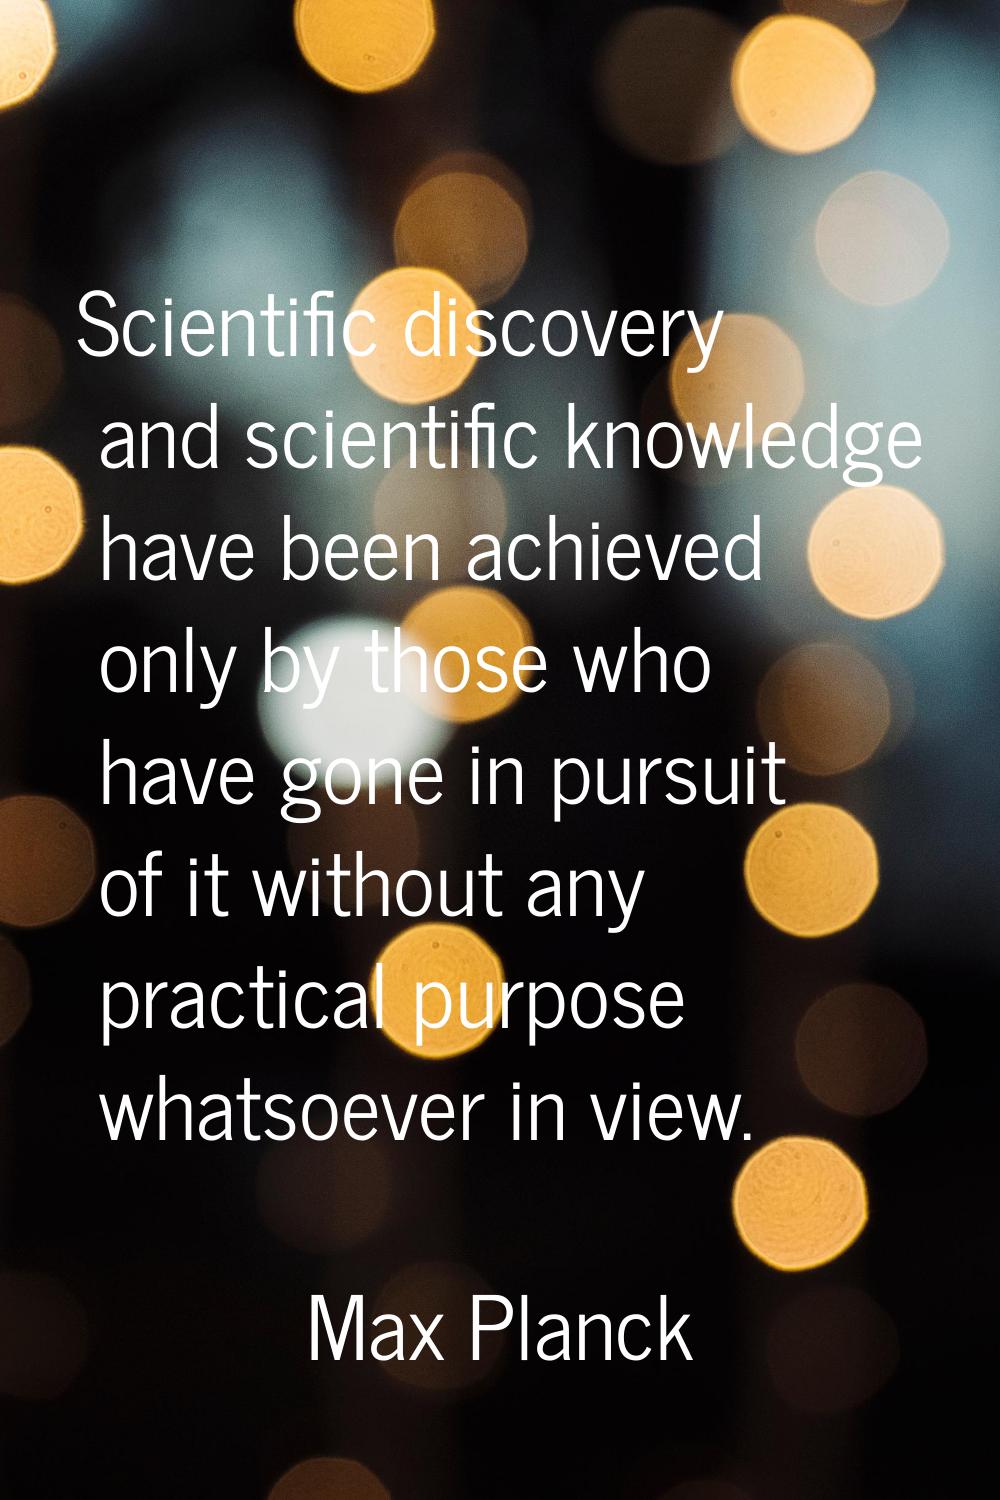 Scientific discovery and scientific knowledge have been achieved only by those who have gone in pur